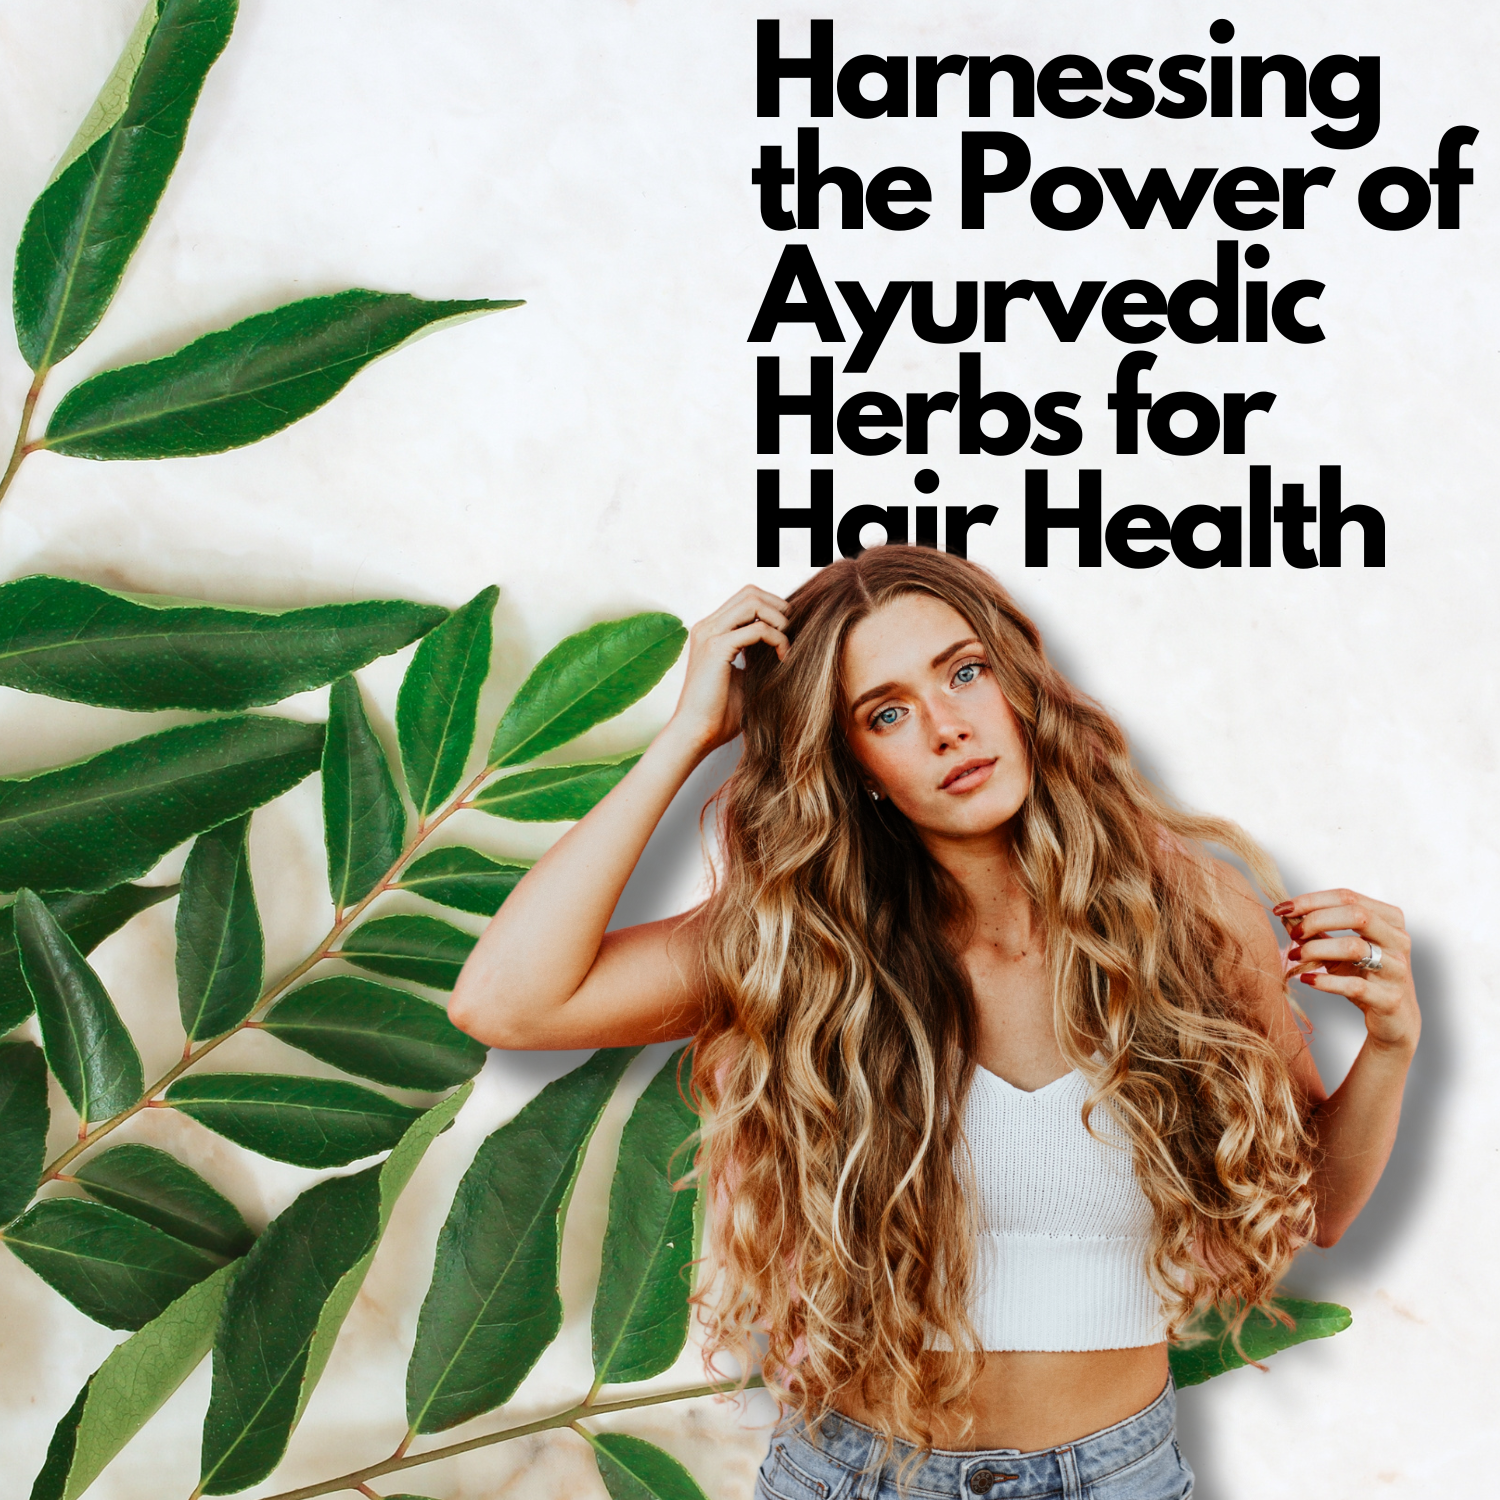 A woman with long, wavy blonde hair is touching her scalp with a thoughtful expression, surrounded by lush green Ayurvedic herb leaves, with text overhead reading 'Harnessing the Power of Ayurvedic Herbs for Hair Health.